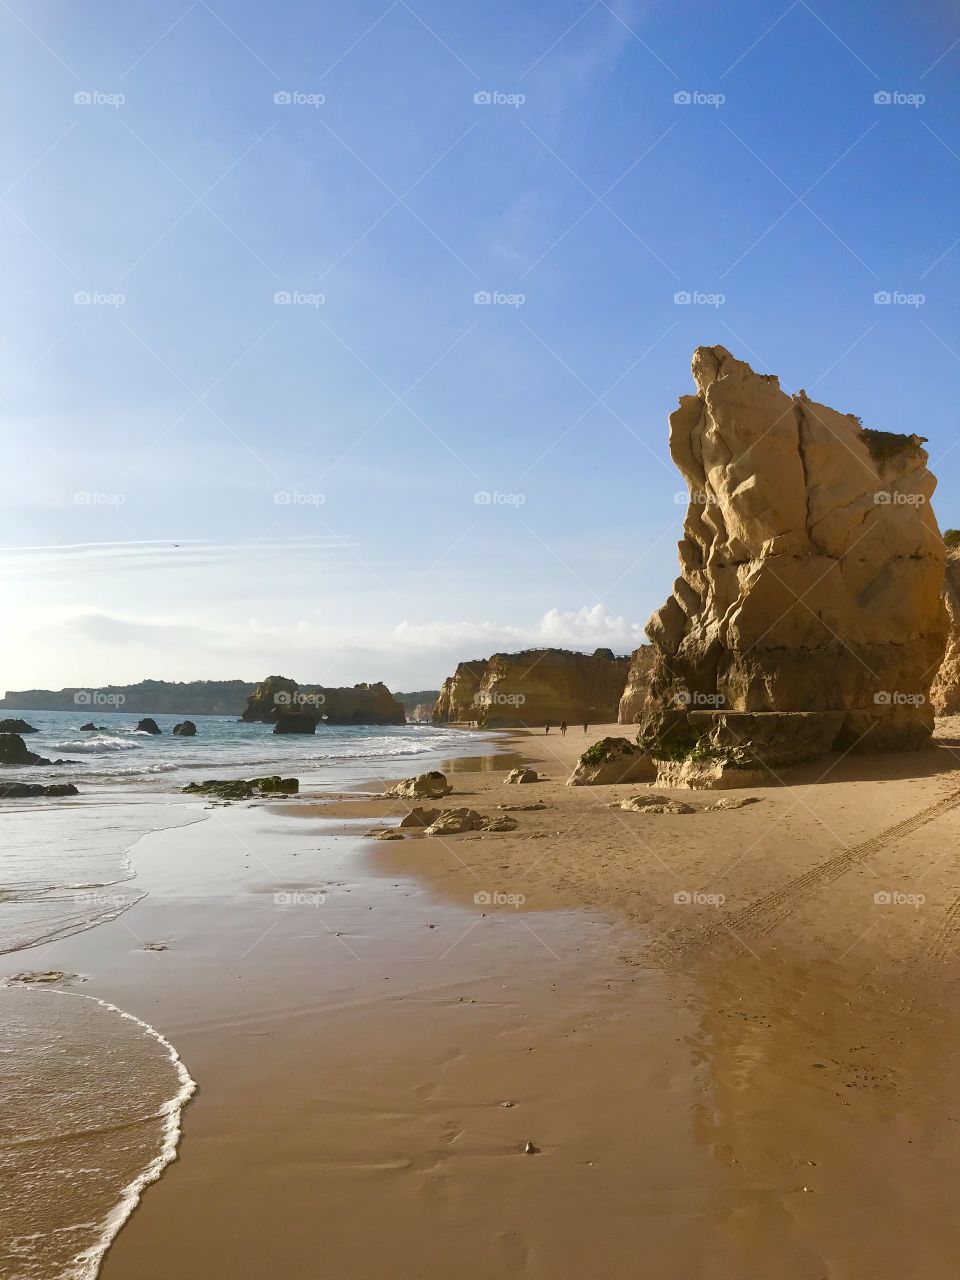 A day at the beach. The tide comes in. Stunning rock formations on the beach. The Algarve, Portugal. 